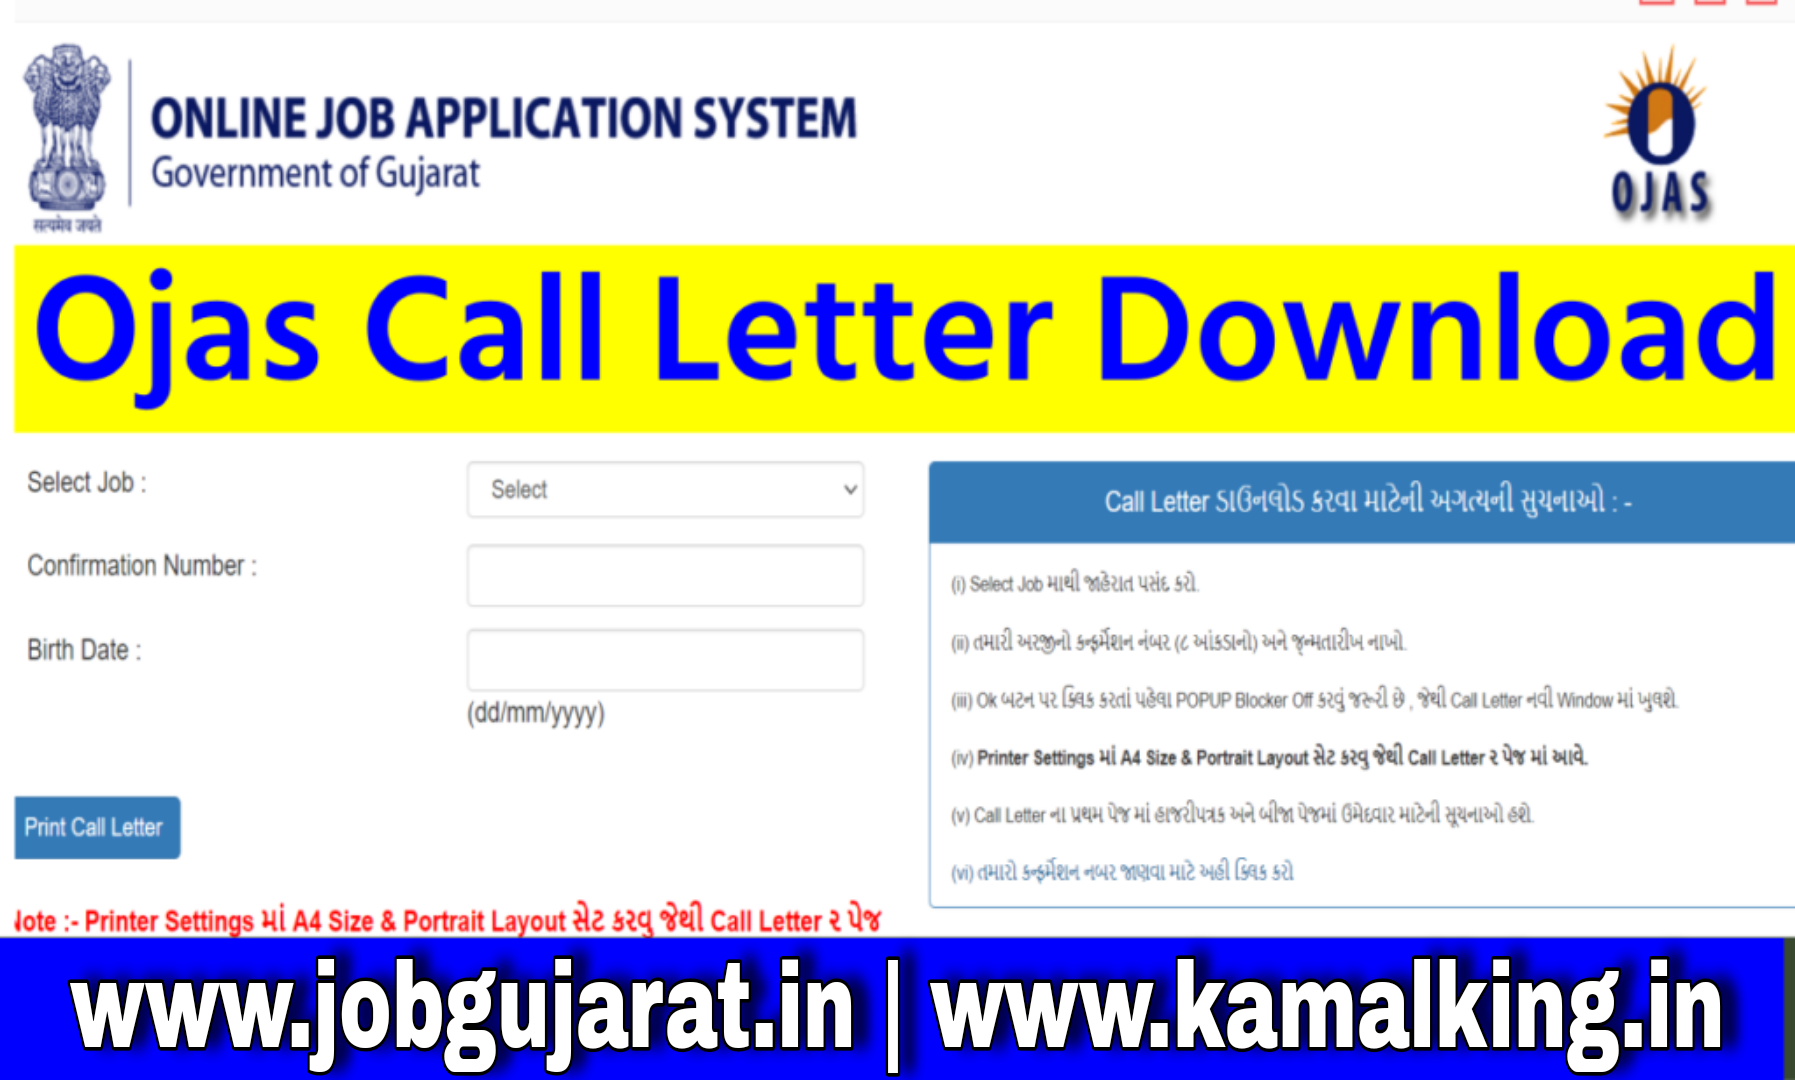 OJAS CALL LETTER DOWNLOAD